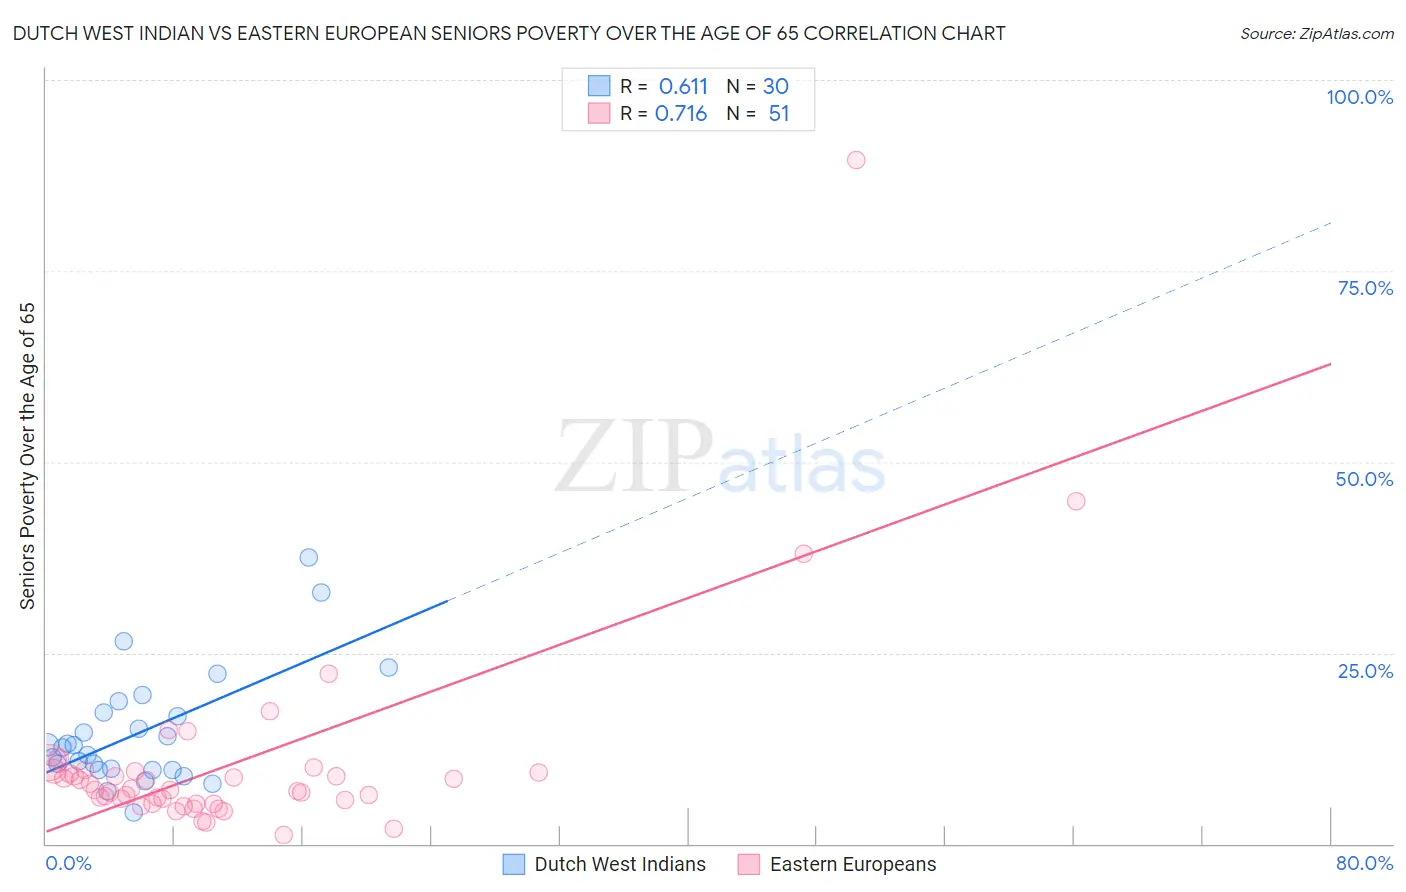 Dutch West Indian vs Eastern European Seniors Poverty Over the Age of 65